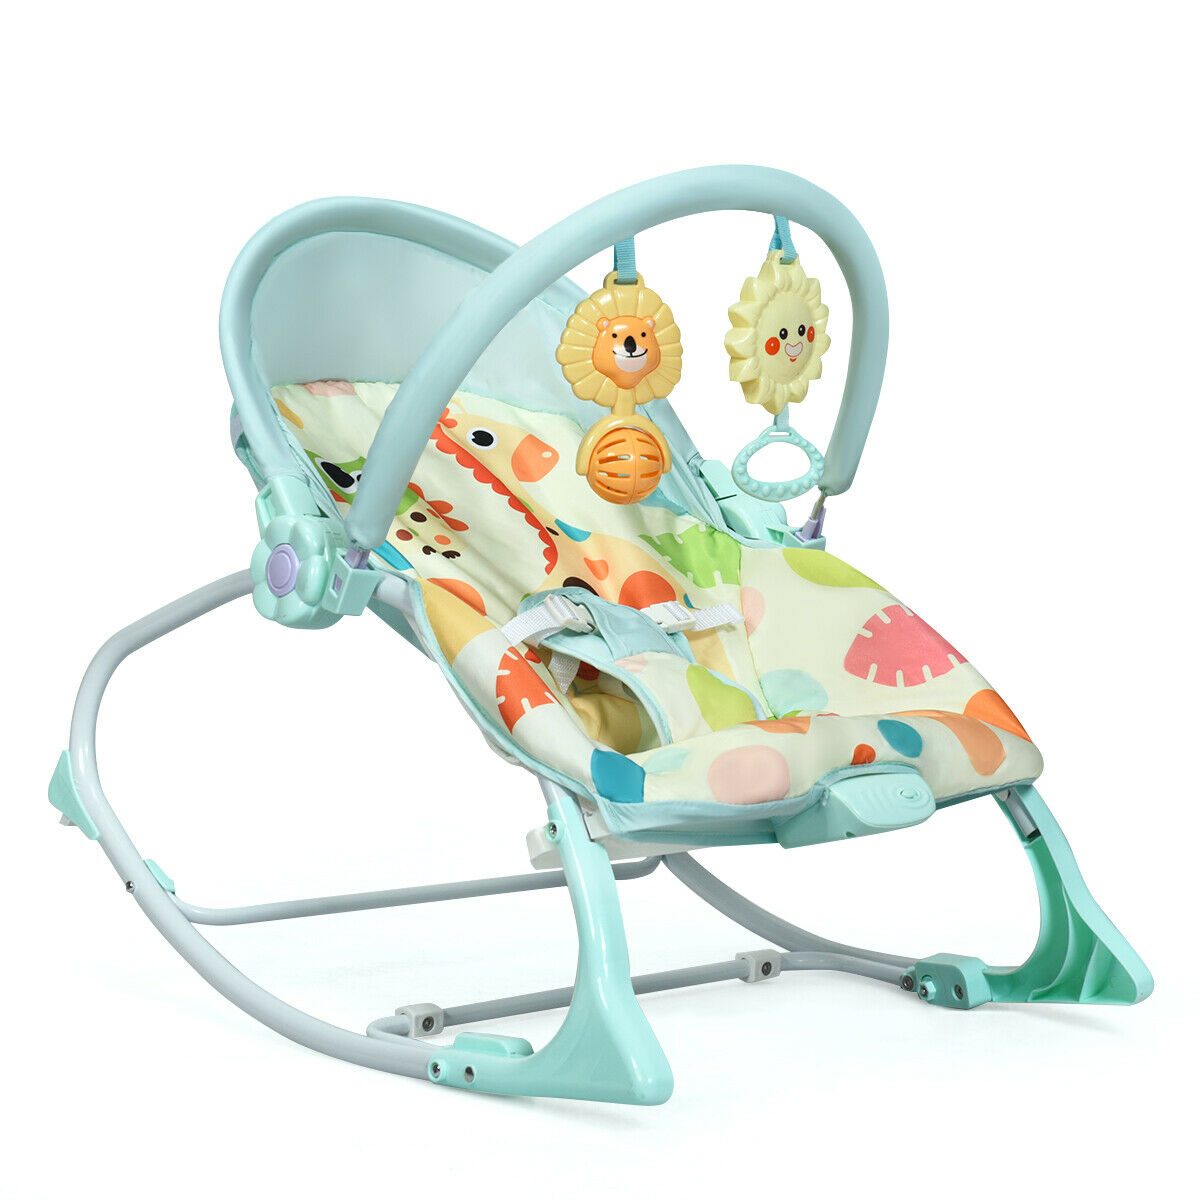 is bouncer vibration safe for baby